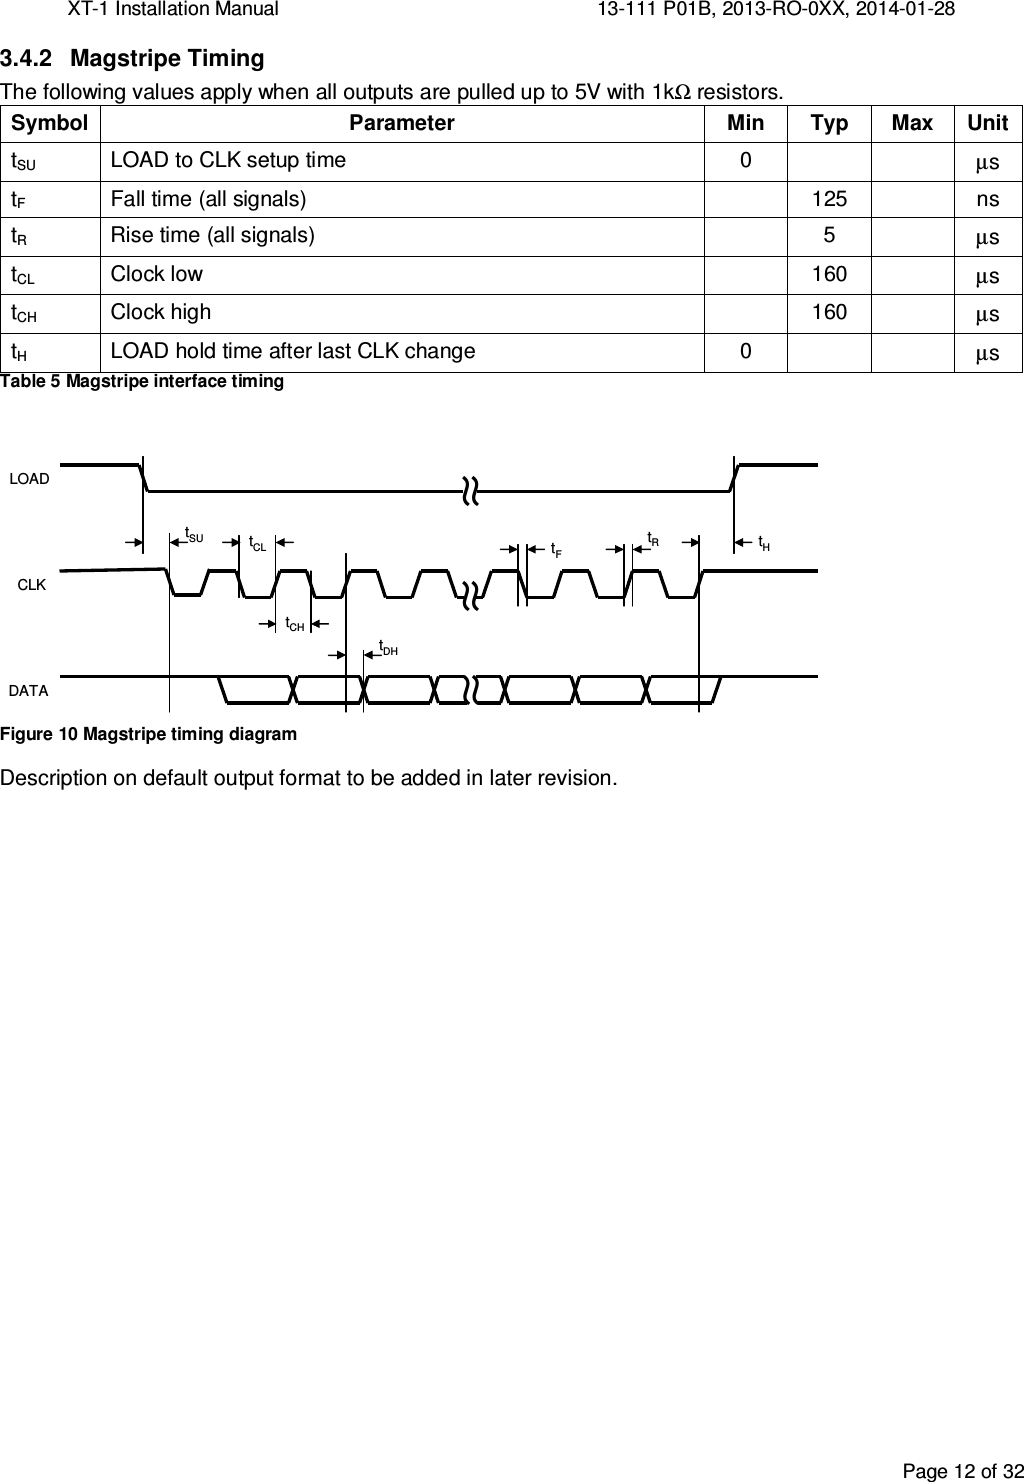 XT-1 Installation Manual     13-111 P01B, 2013-RO-0XX, 2014-01-28  Page 12 of 32  3.4.2  Magstripe Timing The following values apply when all outputs are pulled up to 5V with 1kΩ resistors. Symbol Parameter Min Typ Max Unit tSU  LOAD to CLK setup time  0     µs tF  Fall time (all signals)    125    ns tR  Rise time (all signals)    5    µs tCL  Clock low    160    µs tCH Clock high  160  µs tH LOAD hold time after last CLK change 0   µs Table 5 Magstripe interface timing  ≈≈tSULOADCLKDATA≈tCLtCHtDHtHtRtF Figure 10 Magstripe timing diagram Description on default output format to be added in later revision.   